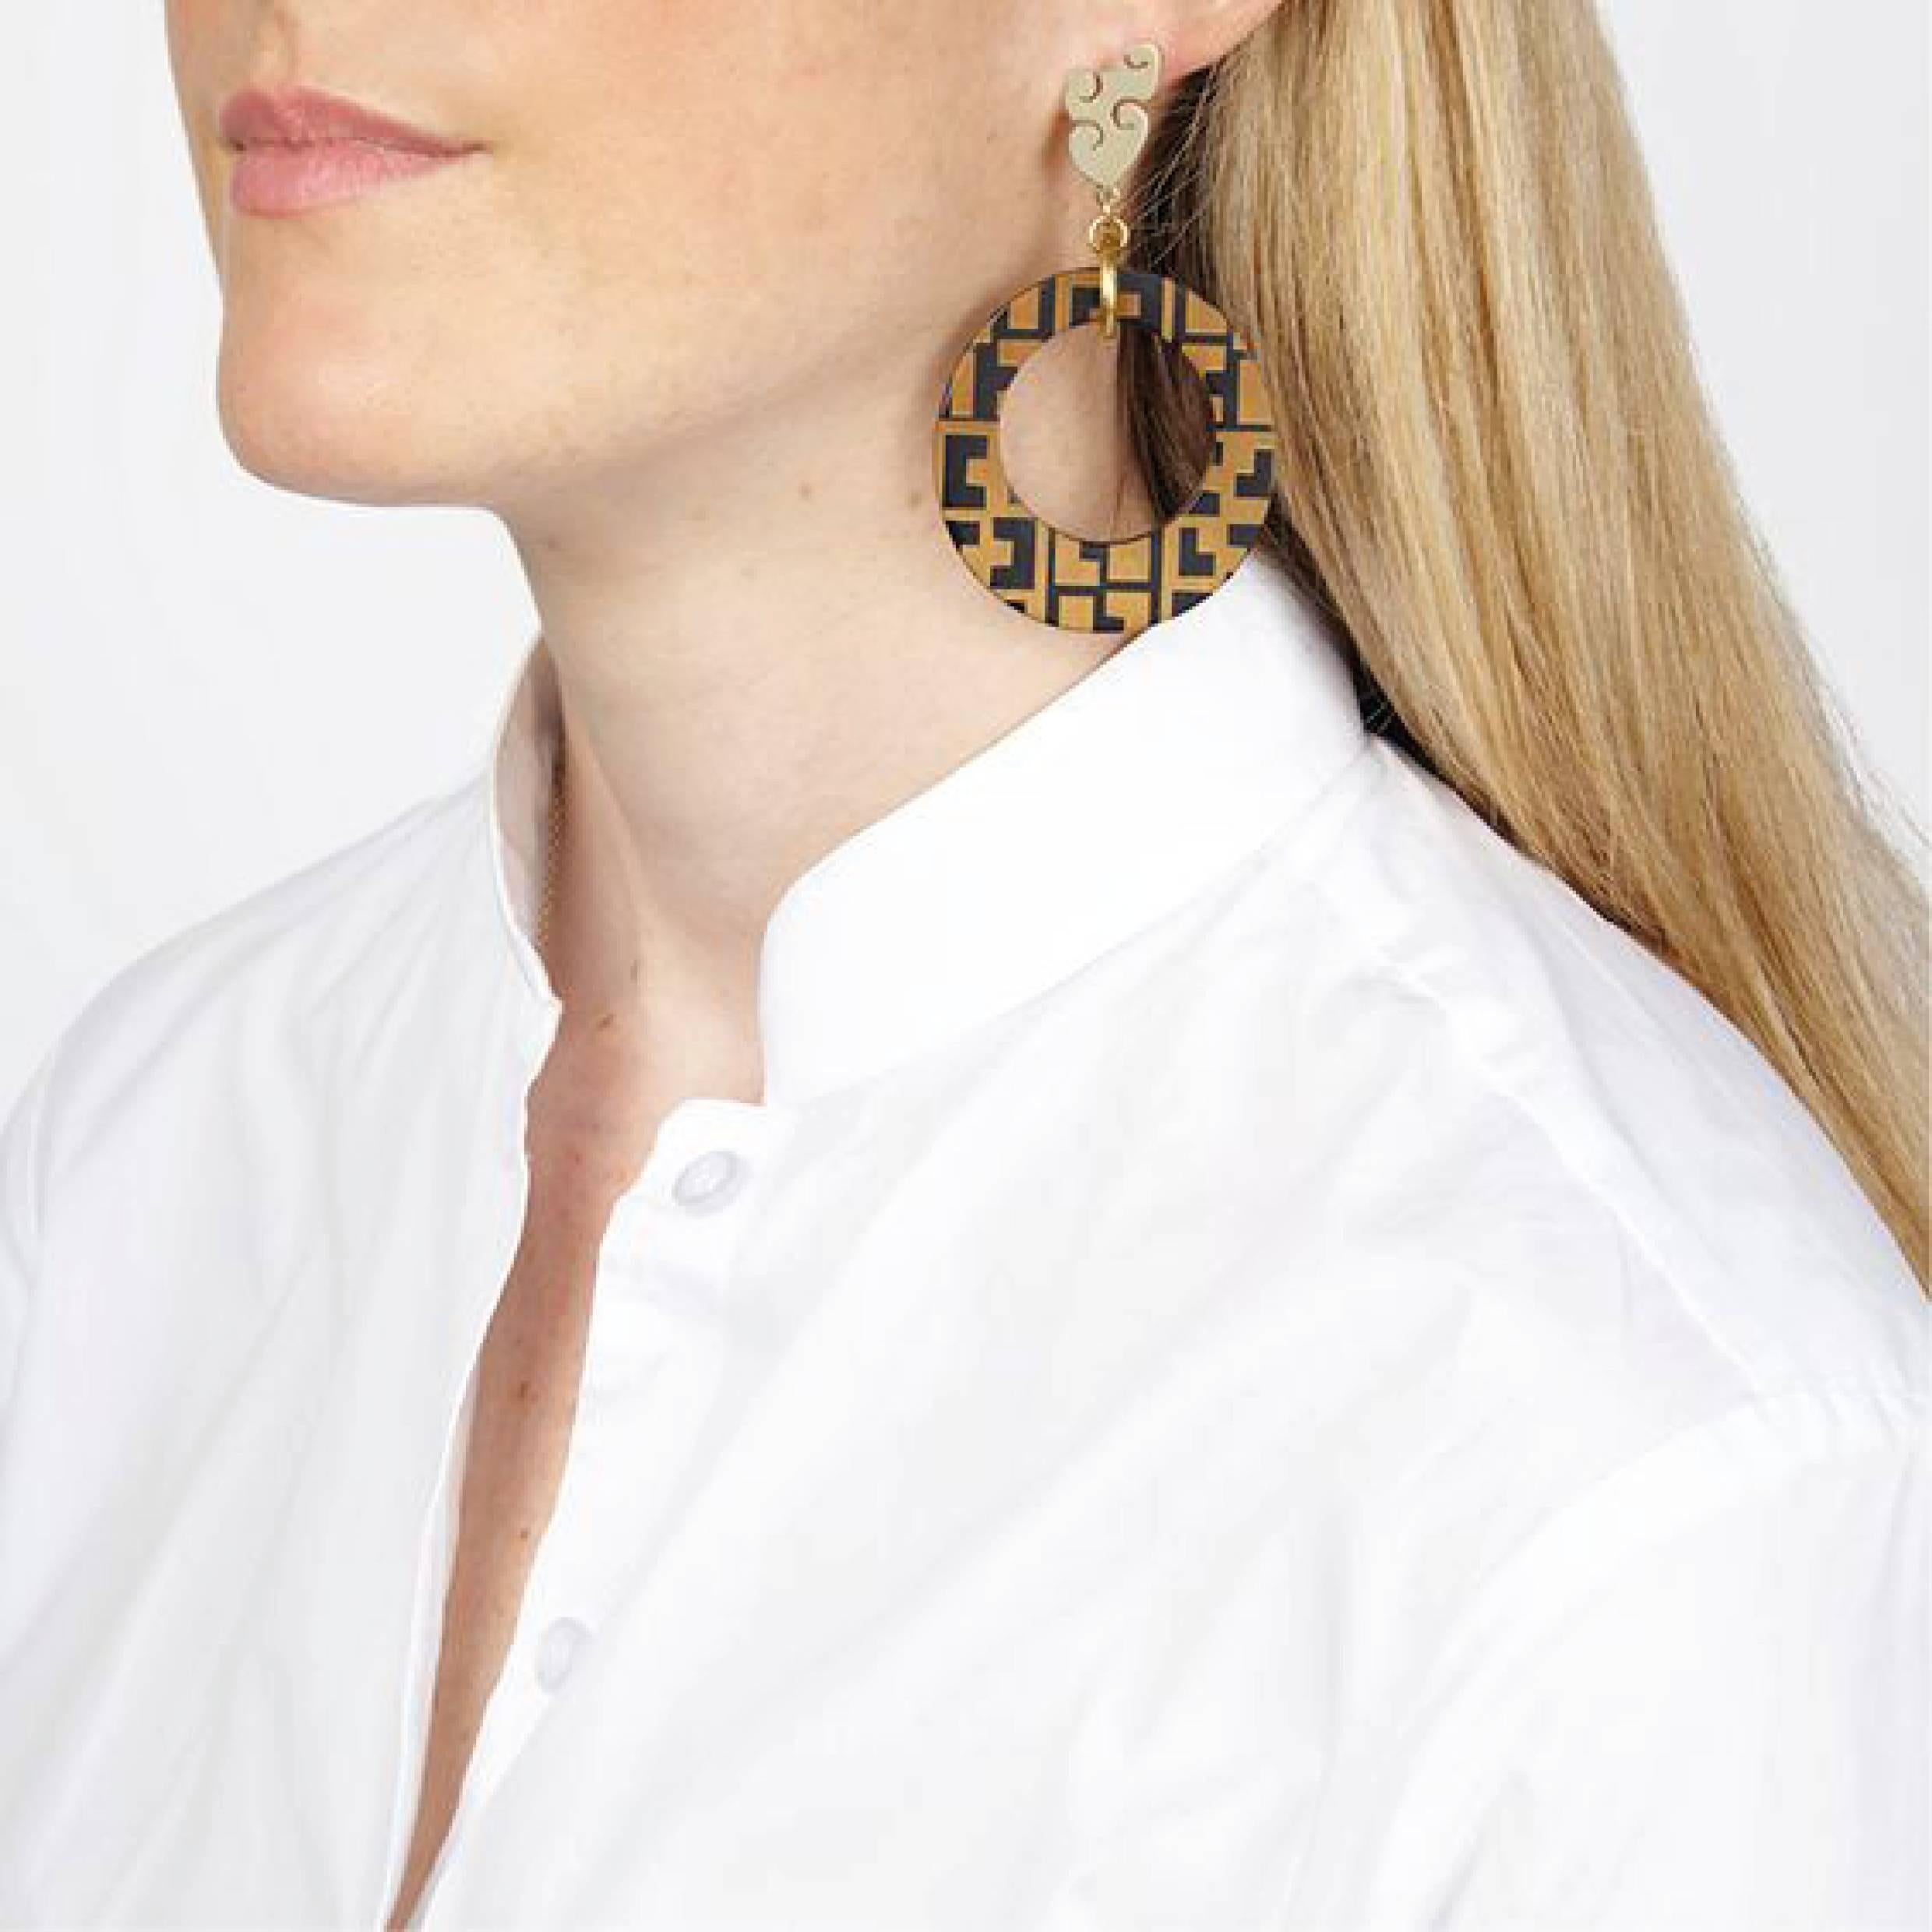 Earrings of engraved cow horn with geometric motif. Handmade in London from African cow horn.

Earrings come pierced with solid silver pin-backs. Please note that horn graining and slight irregularities in color may occur. 

The Fouché collection